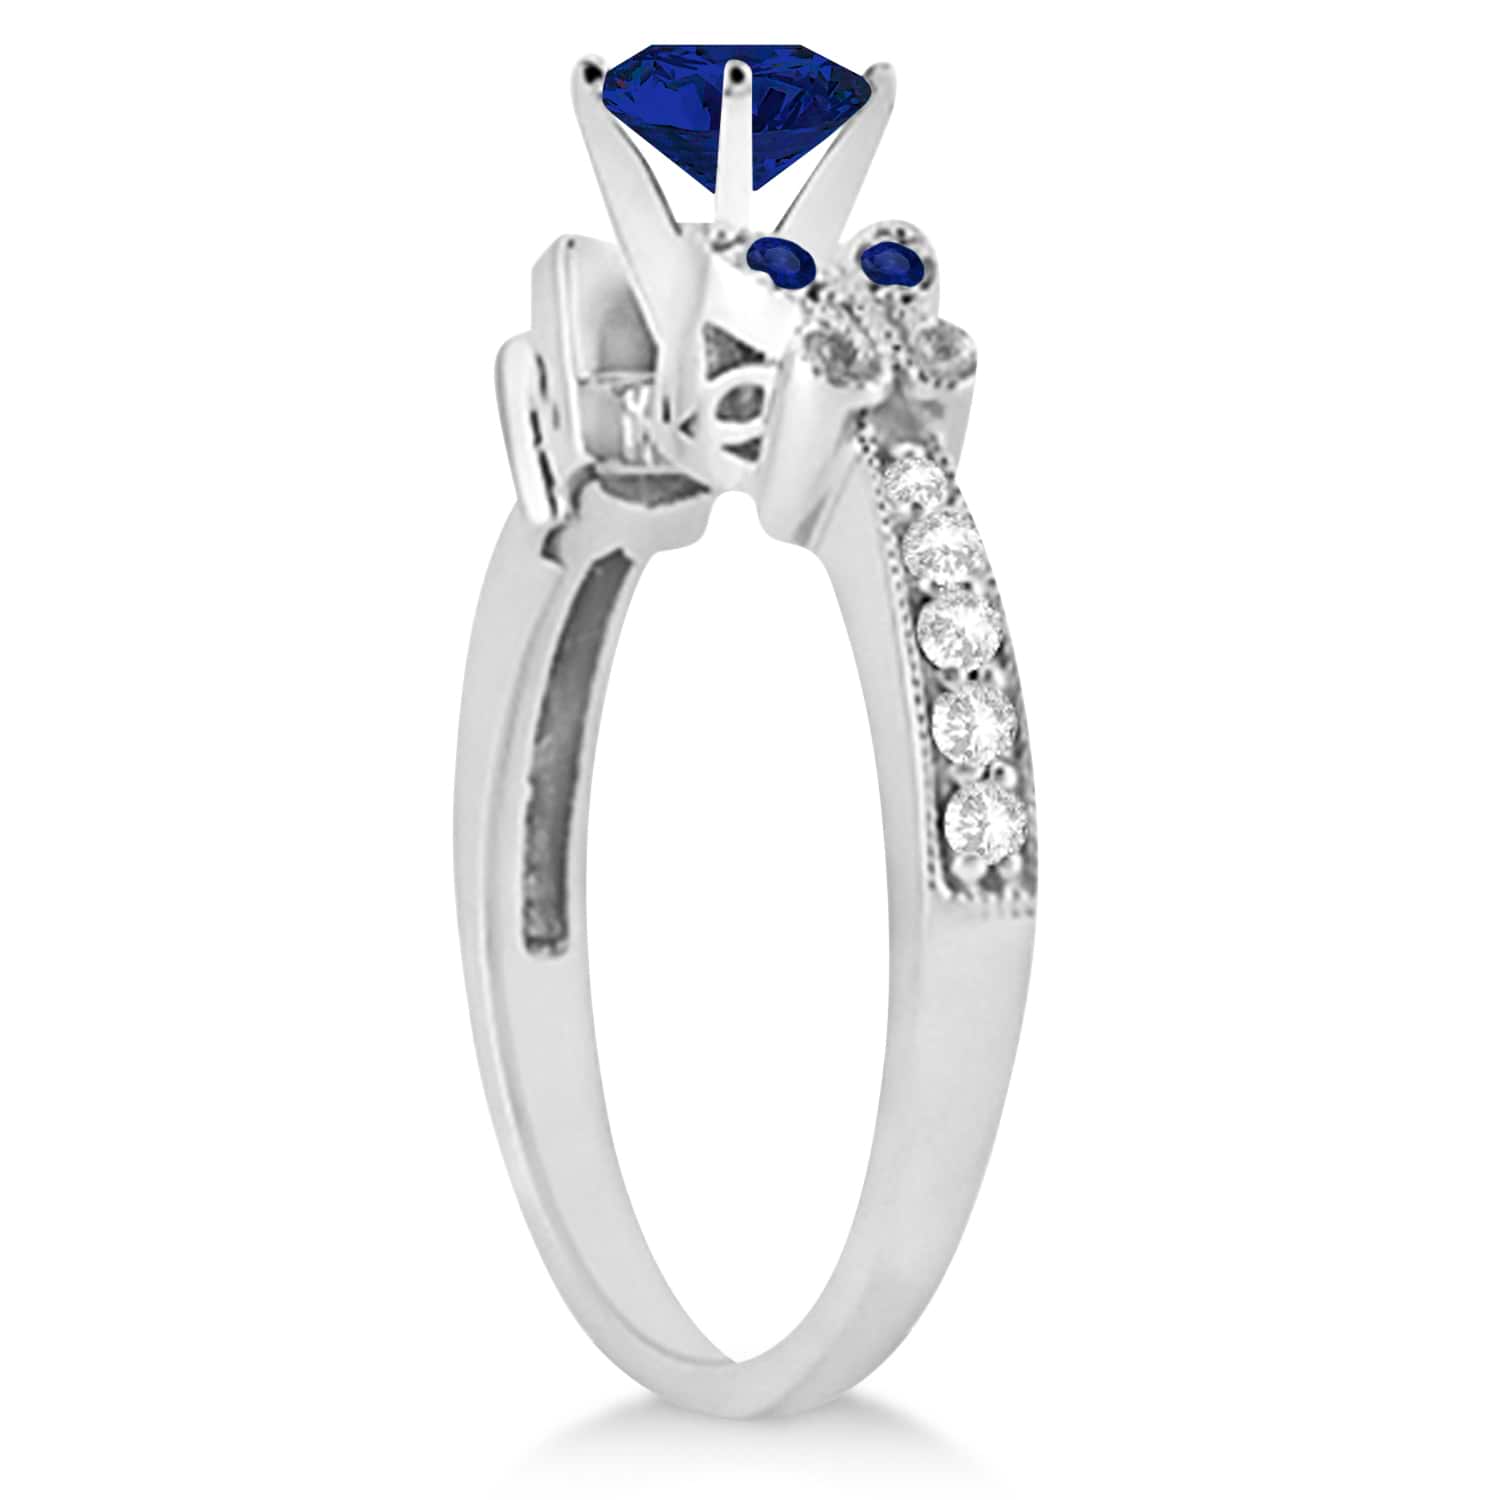 Butterfly Blue Sapphire & Diamond Engagement Ring 18K White Gold (1.83ct)